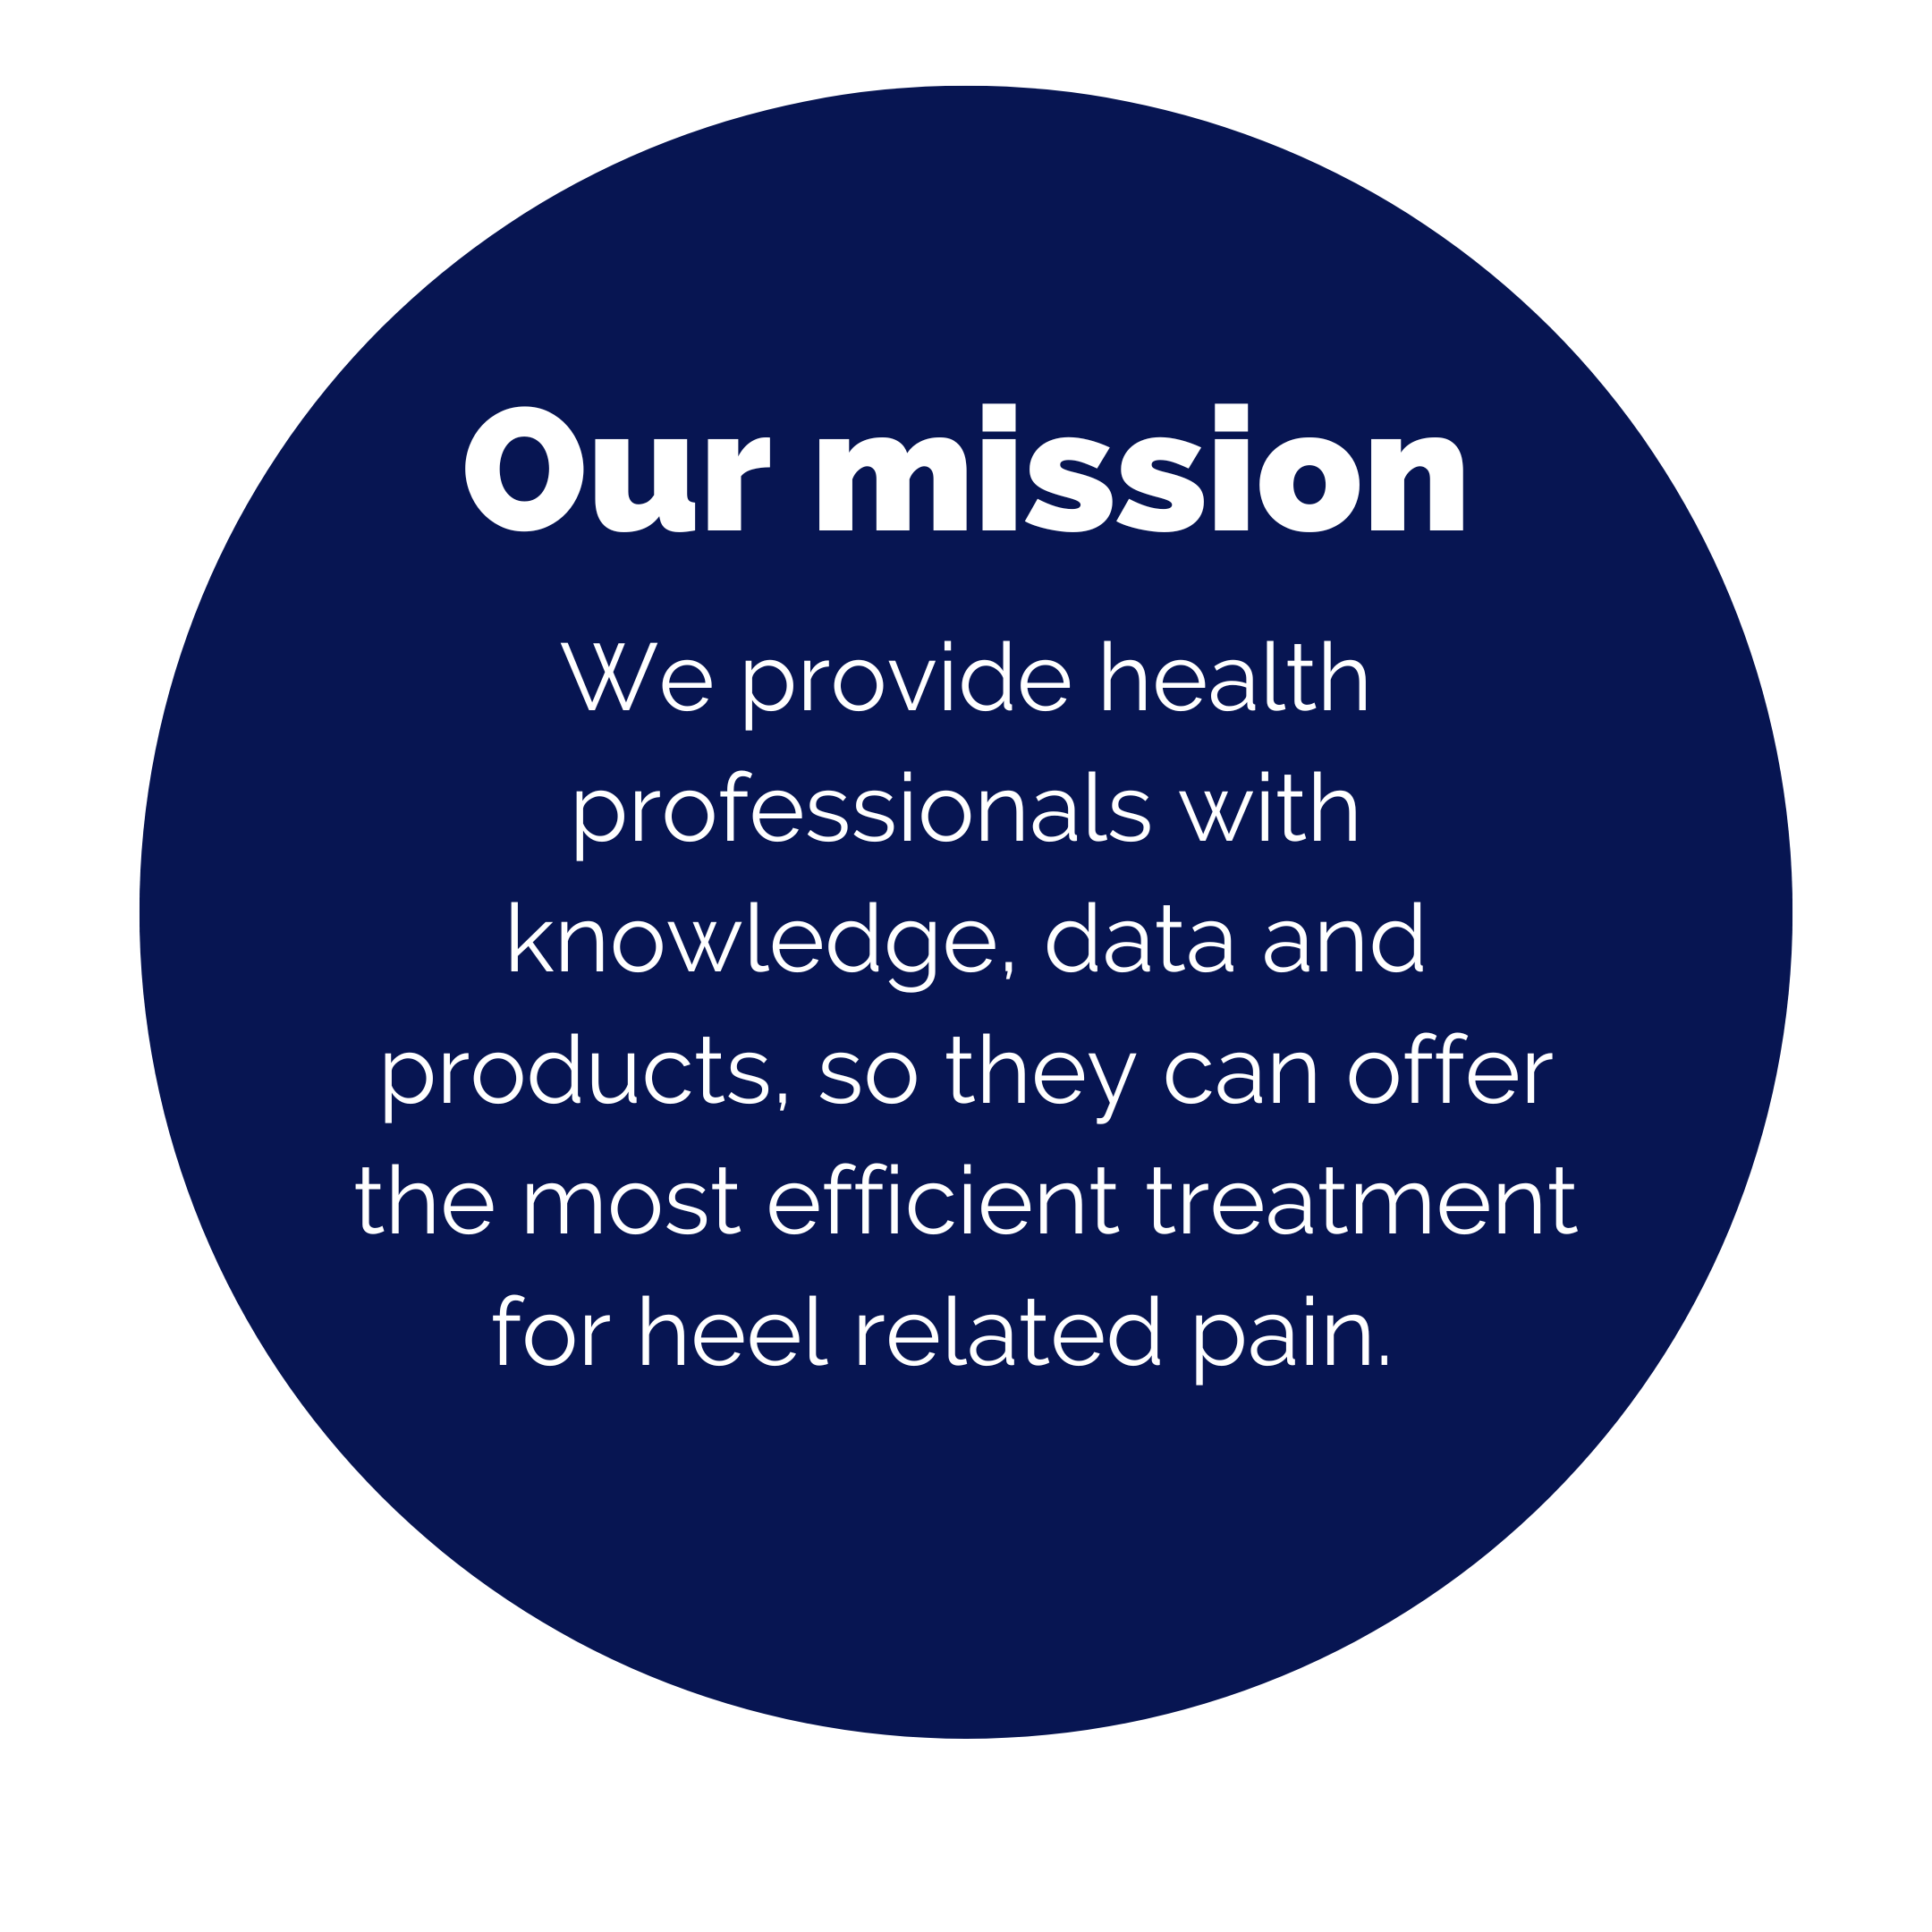 About us - our mission statement